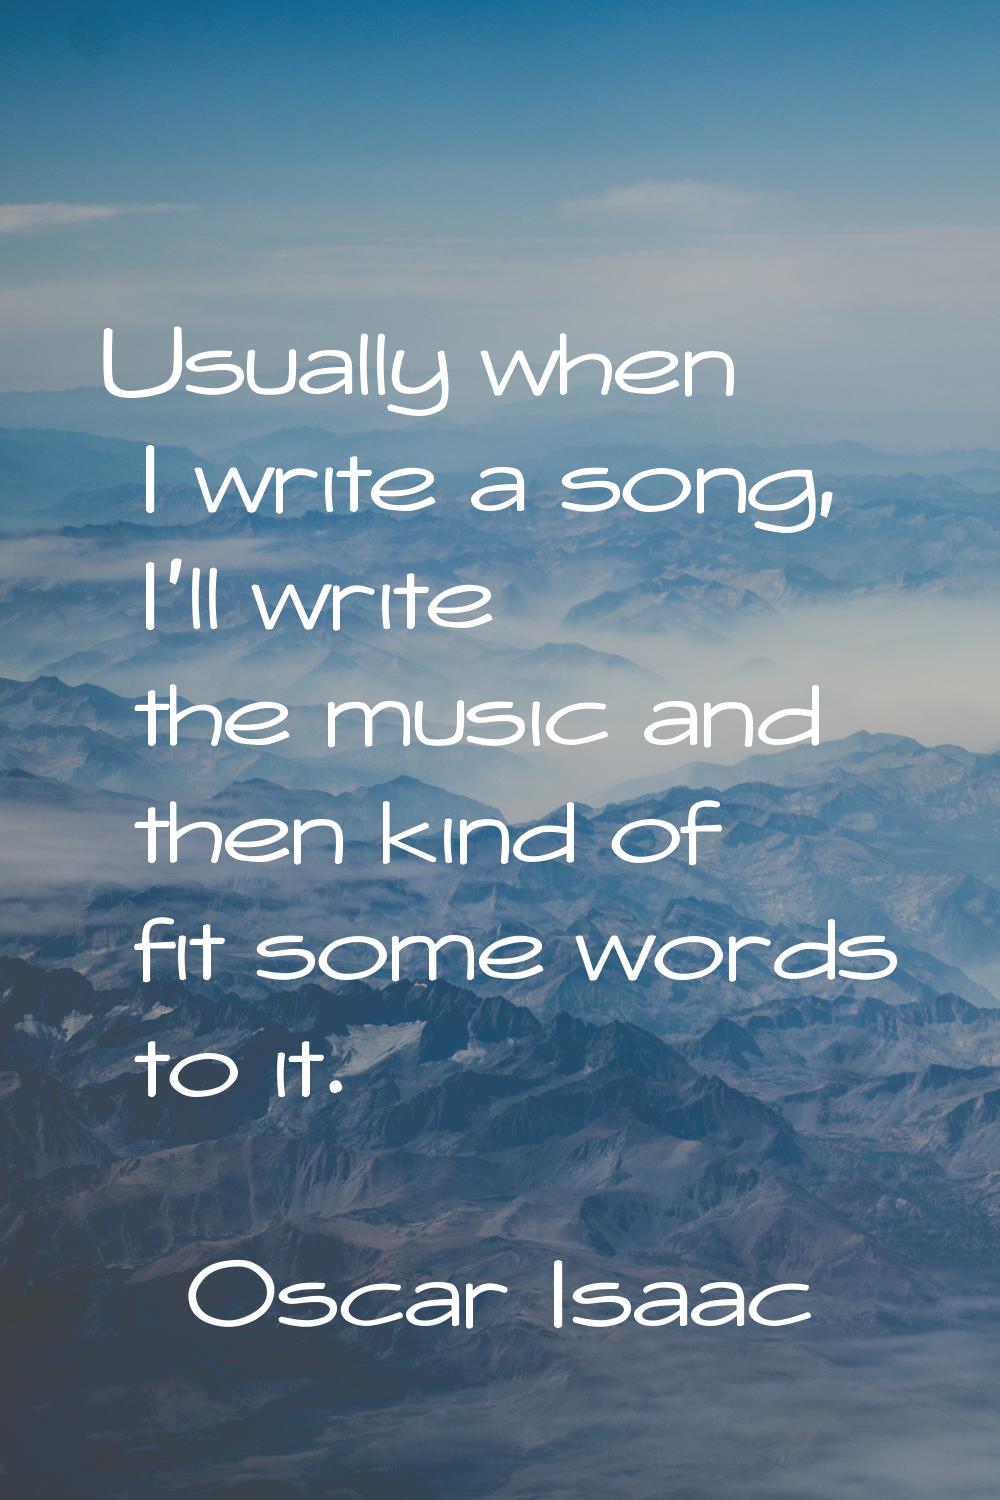 Usually when I write a song, I'll write the music and then kind of fit some words to it.